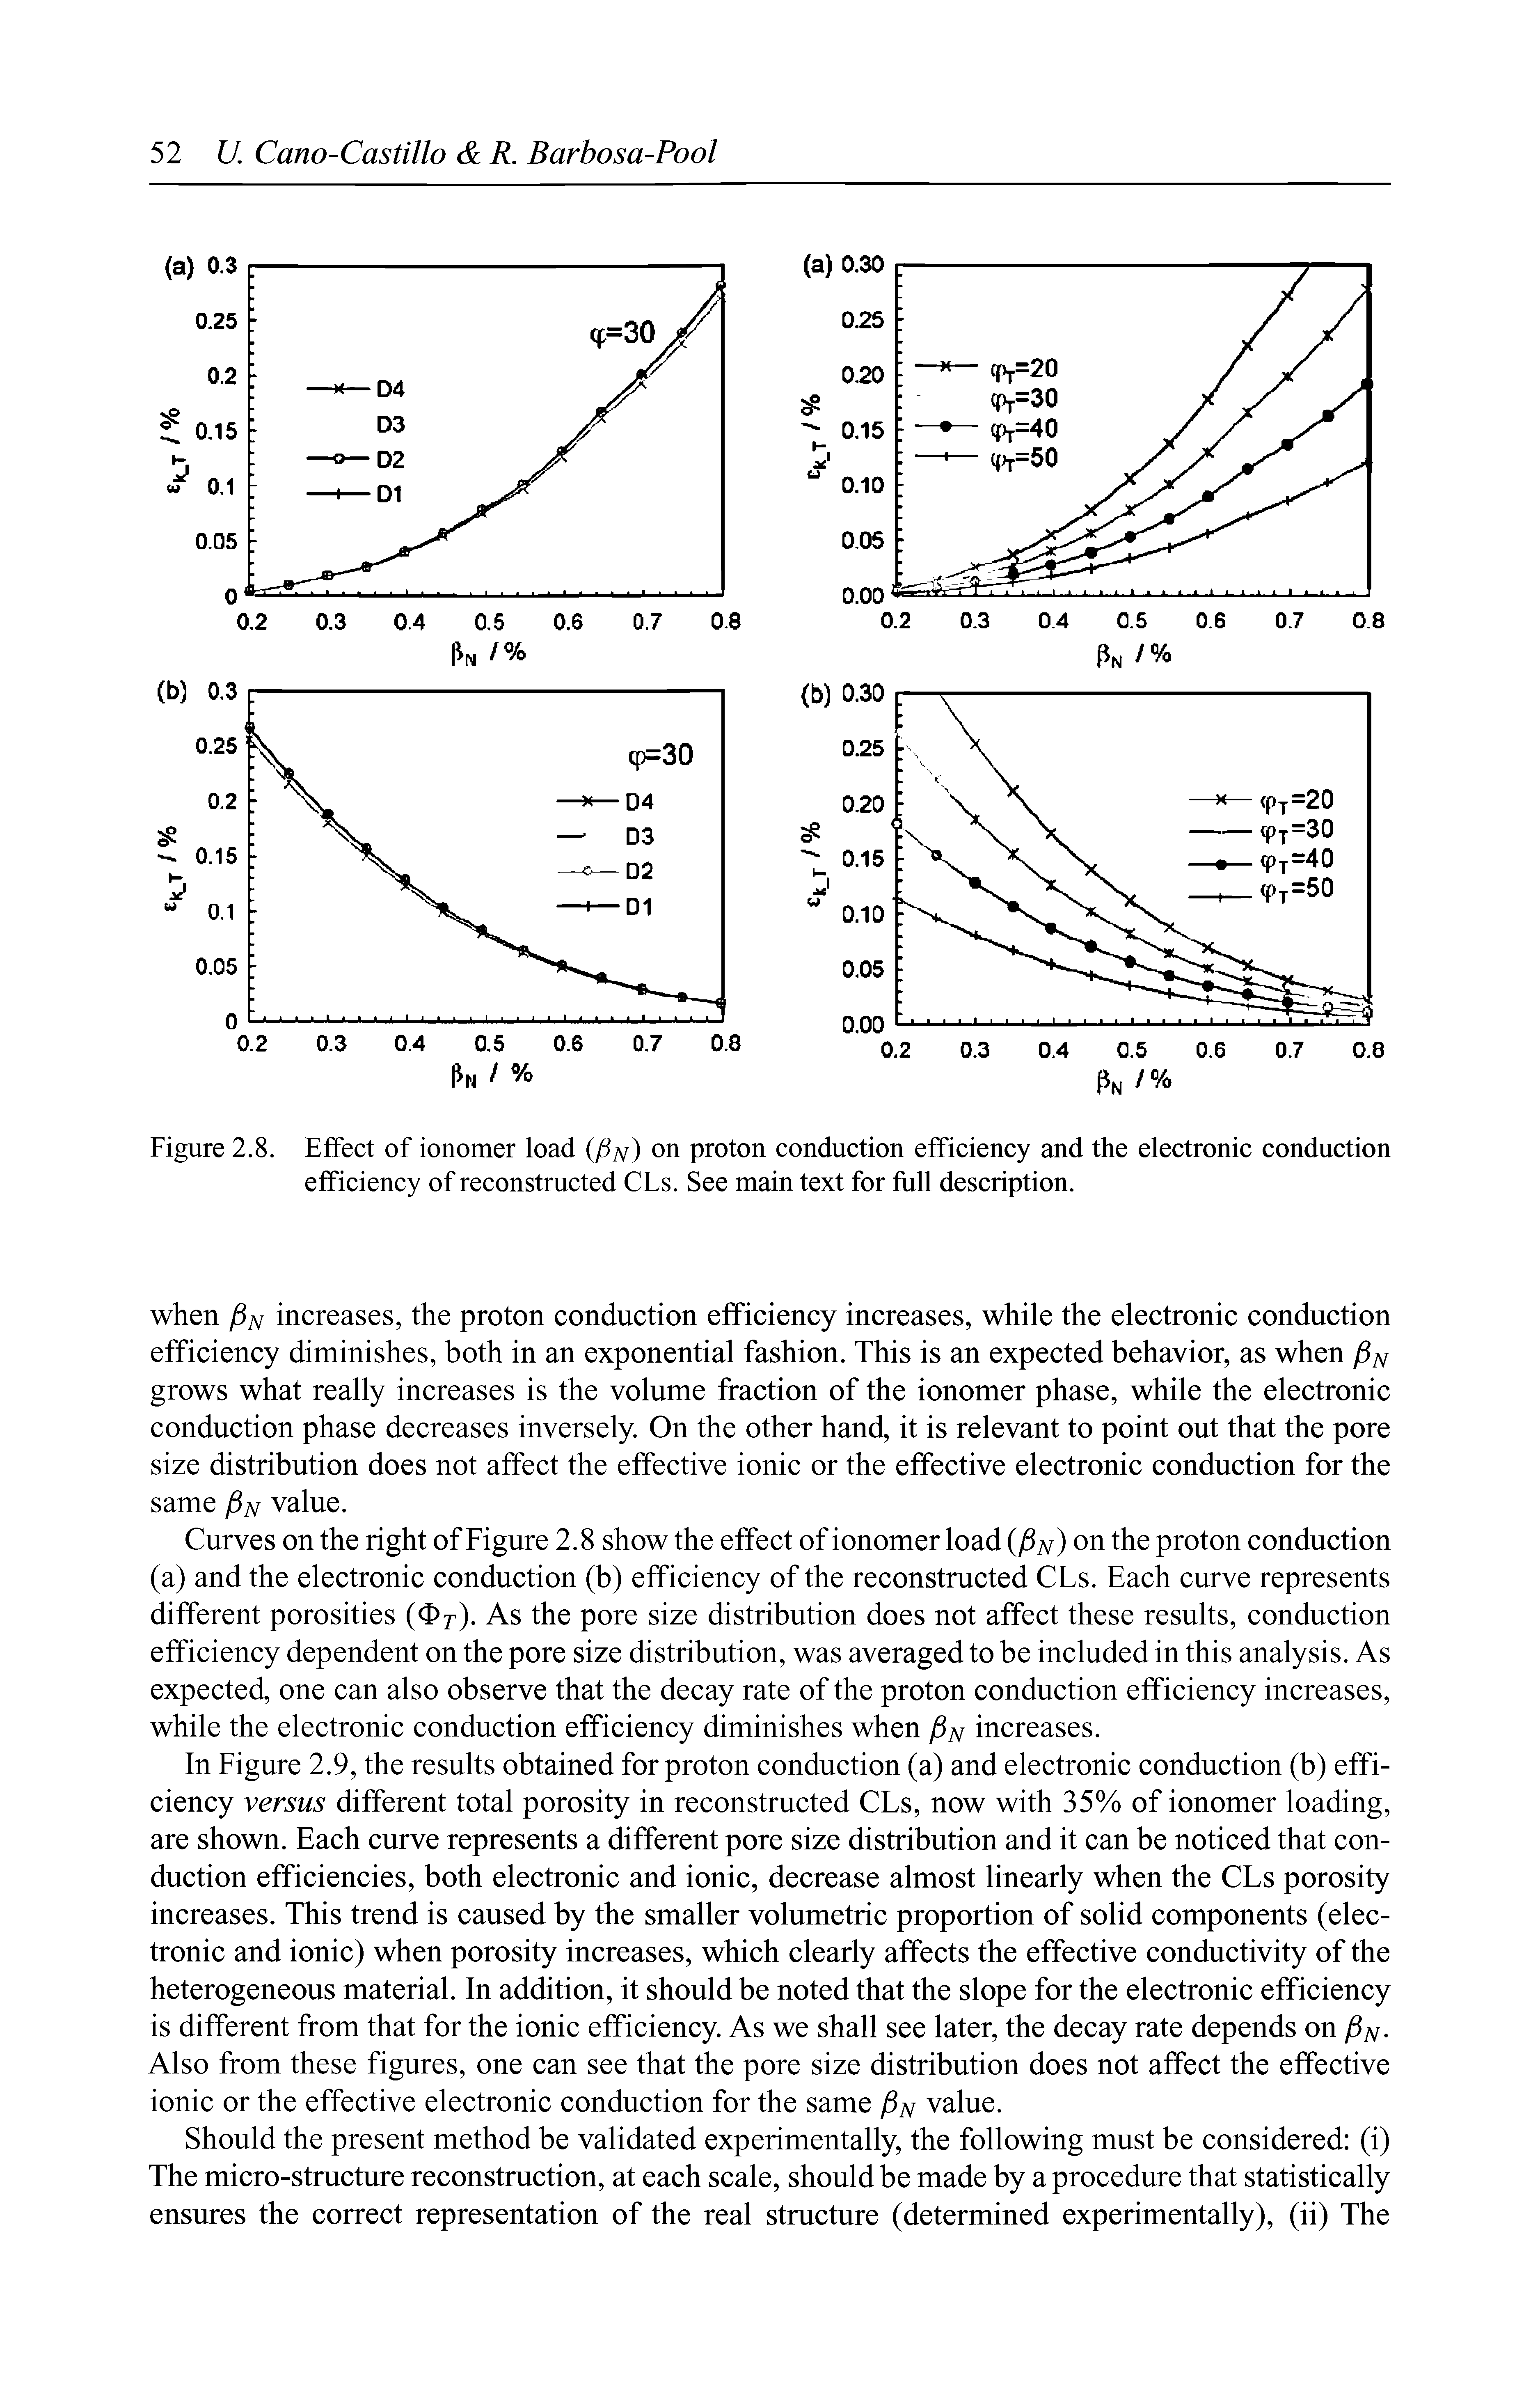 Figure 2.8. Effect of ionomer load ( n) on proton conduction efficiency and the electronic conduction efficiency of reconstructed CLs. See main text for full description.